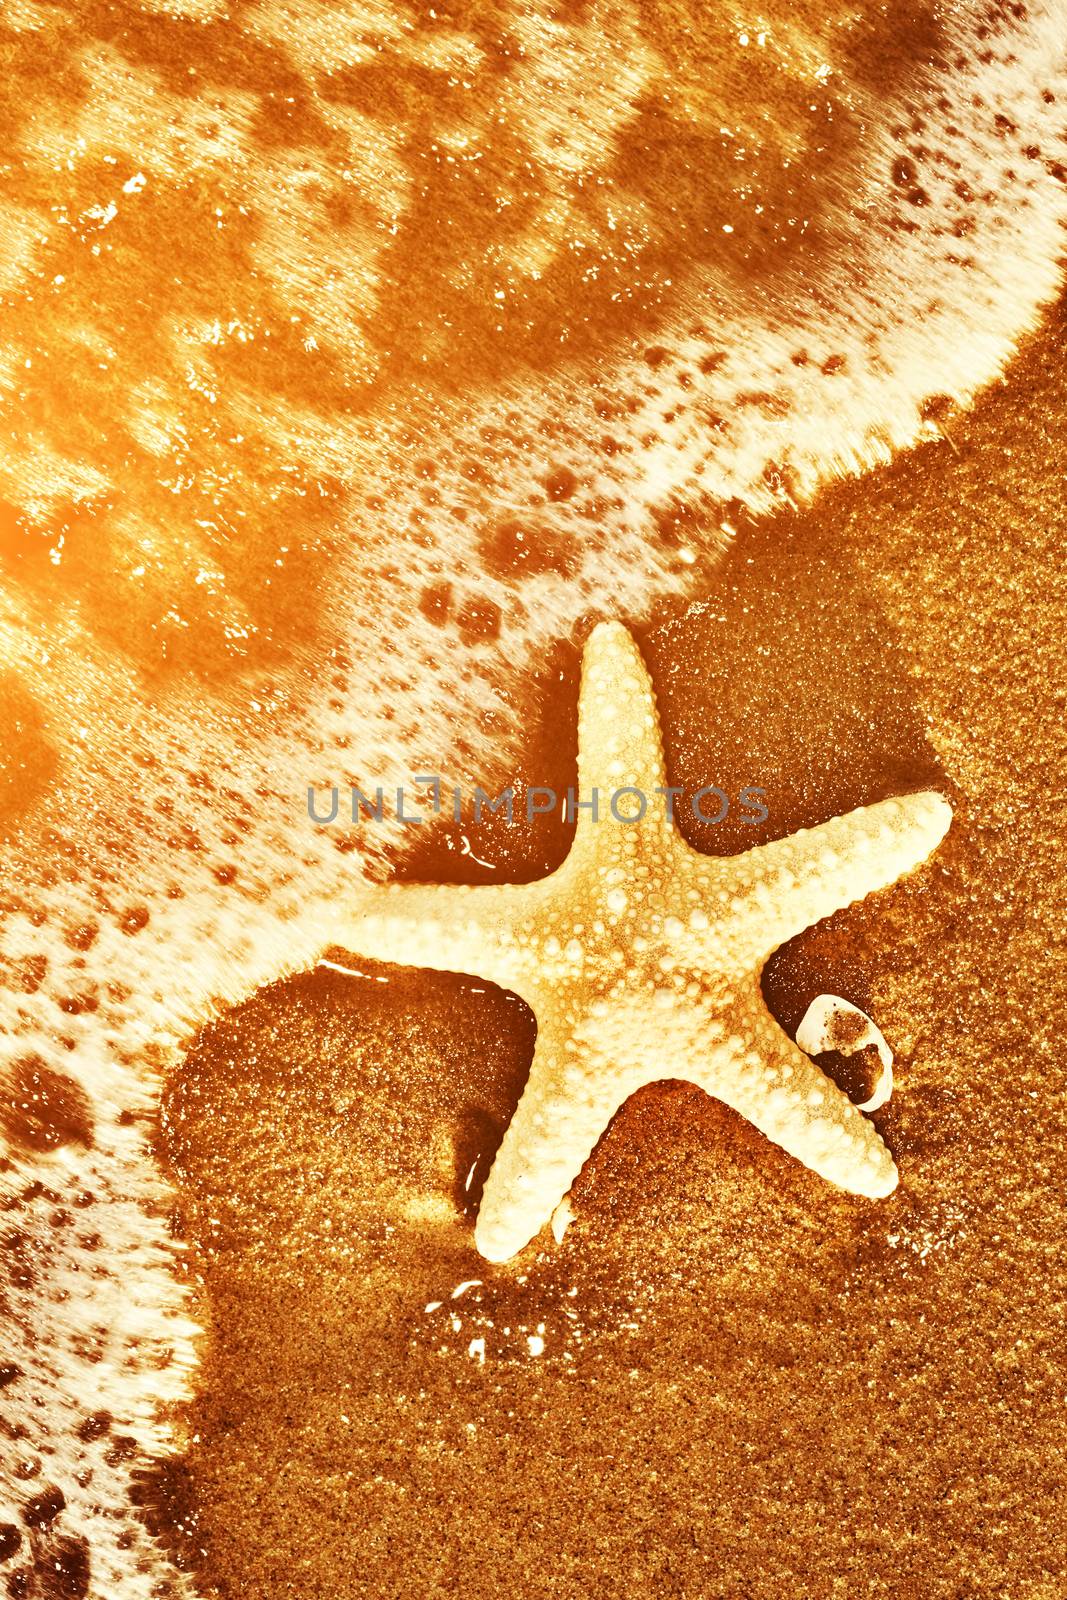 Starfish on the exotic beach, ocean waves at warm sunset. Travel, vacation, holidays concepts